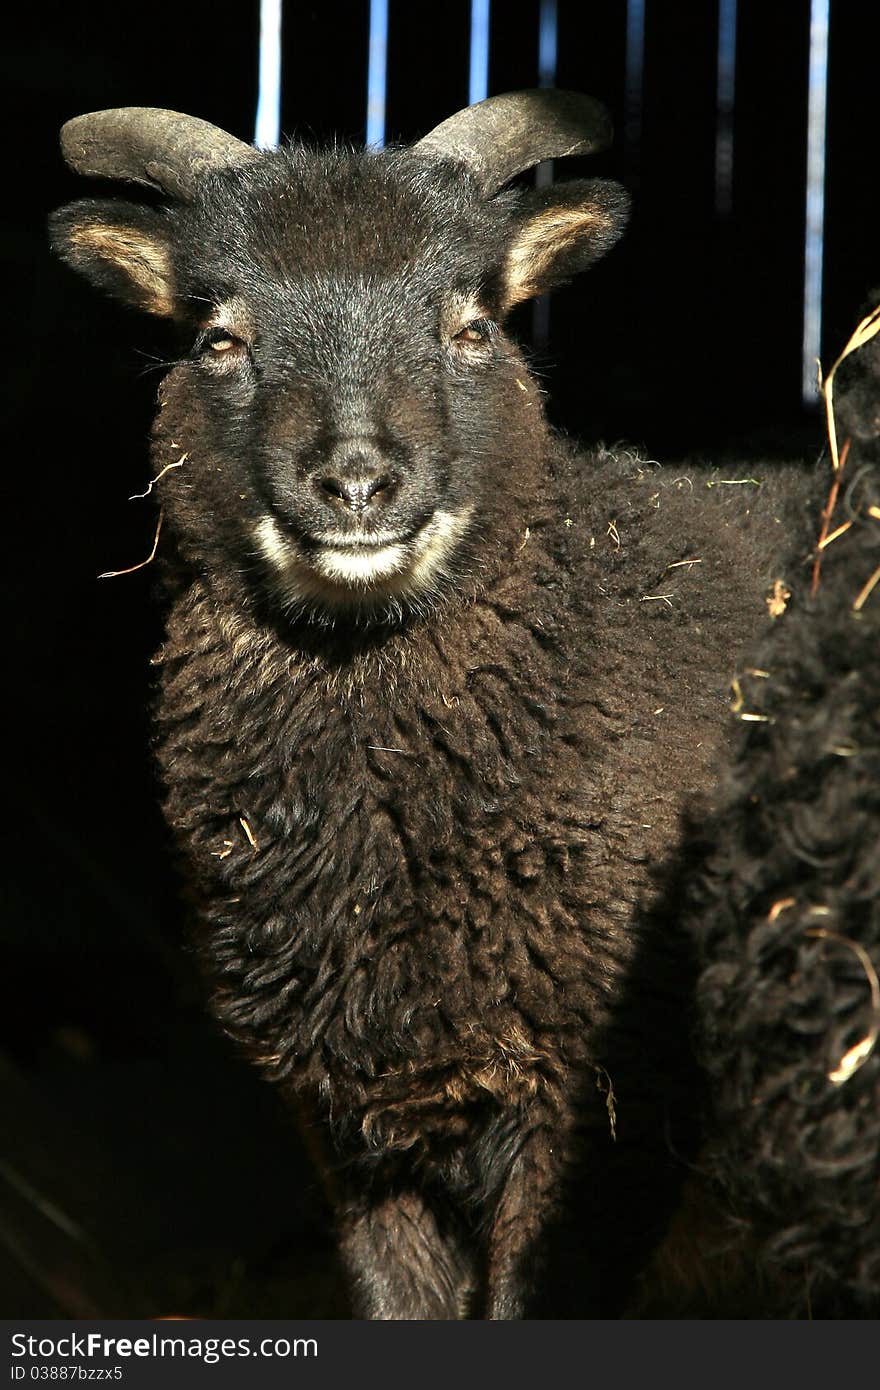 Black lamb standing in the doorway of the barn. Skudde - the most primitive and smallest sheep breed in Europe on the field in Pasterka village in Poland.